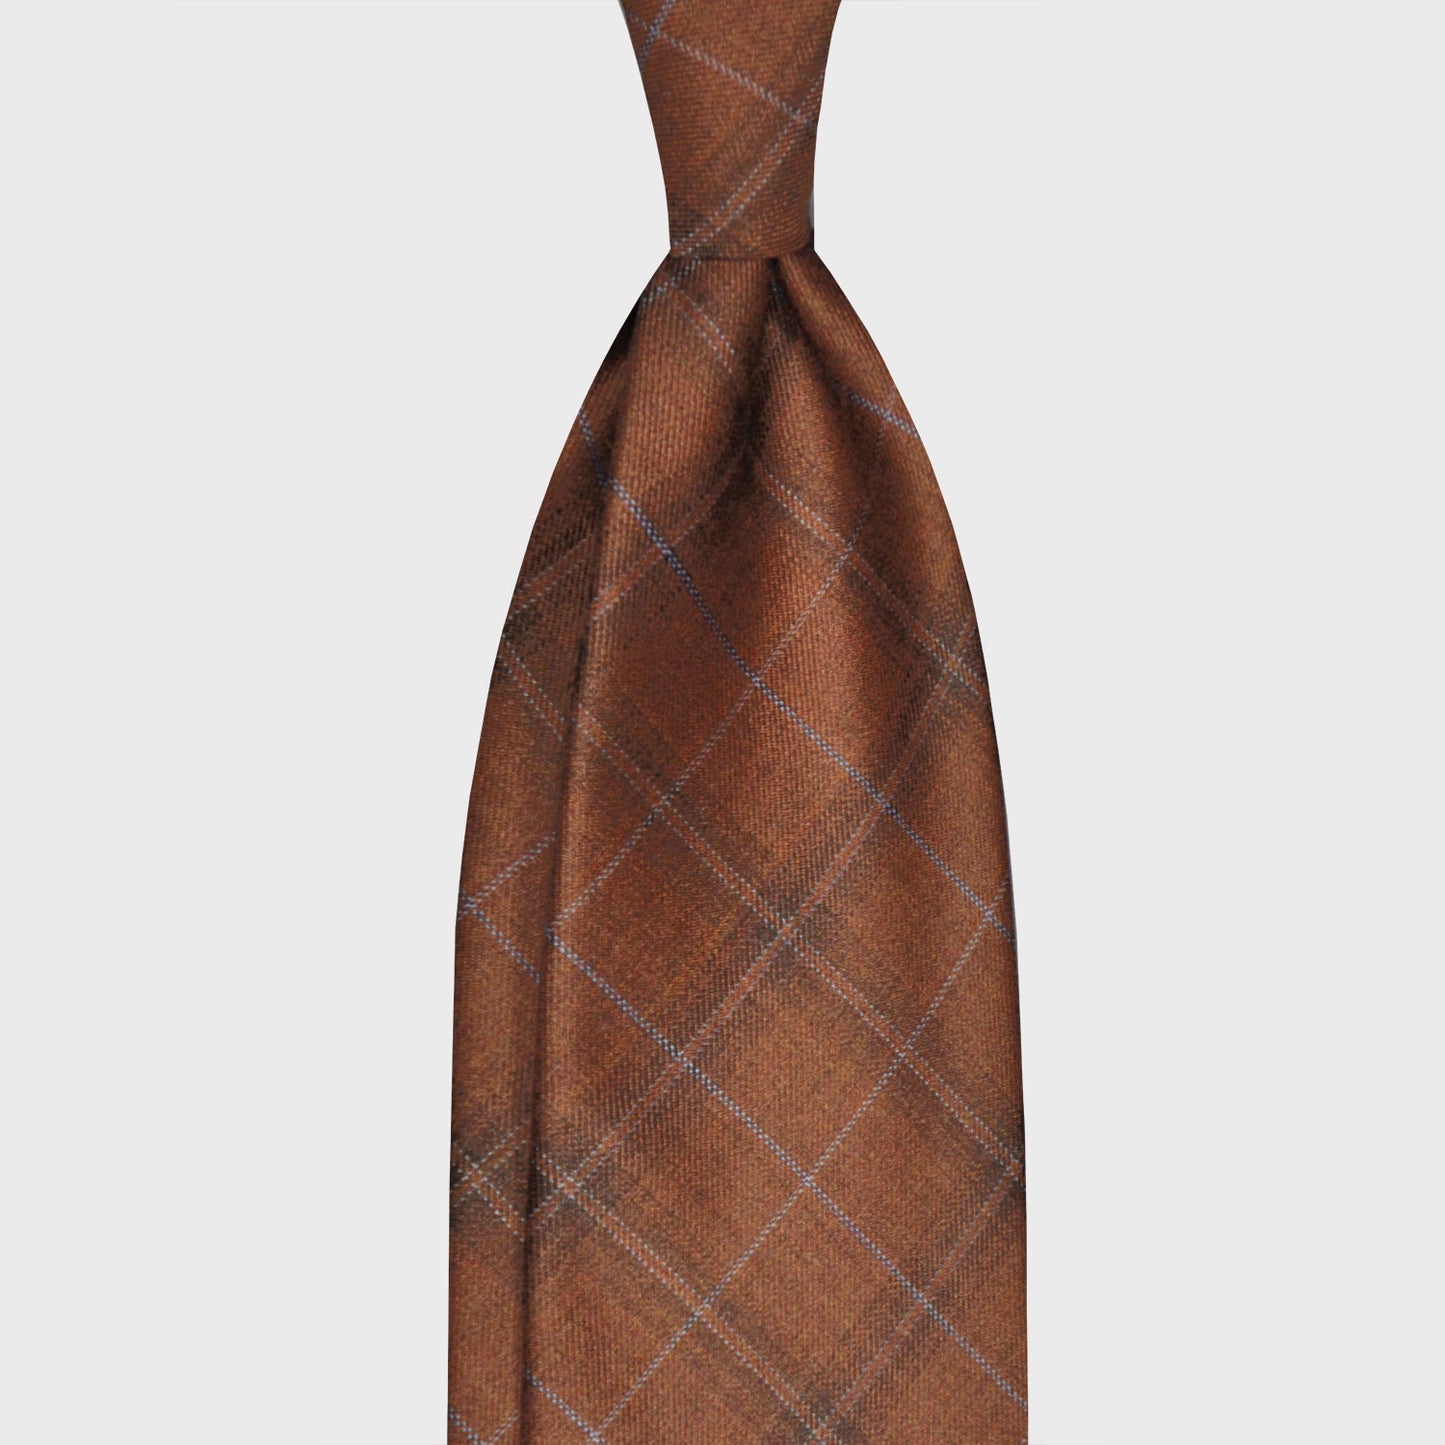 F.Marino Napoli handmade wool tie for Wools Boutique Uomo, made by super fine wool 100's, unlined, rust brown, light blue and brown coffee checked